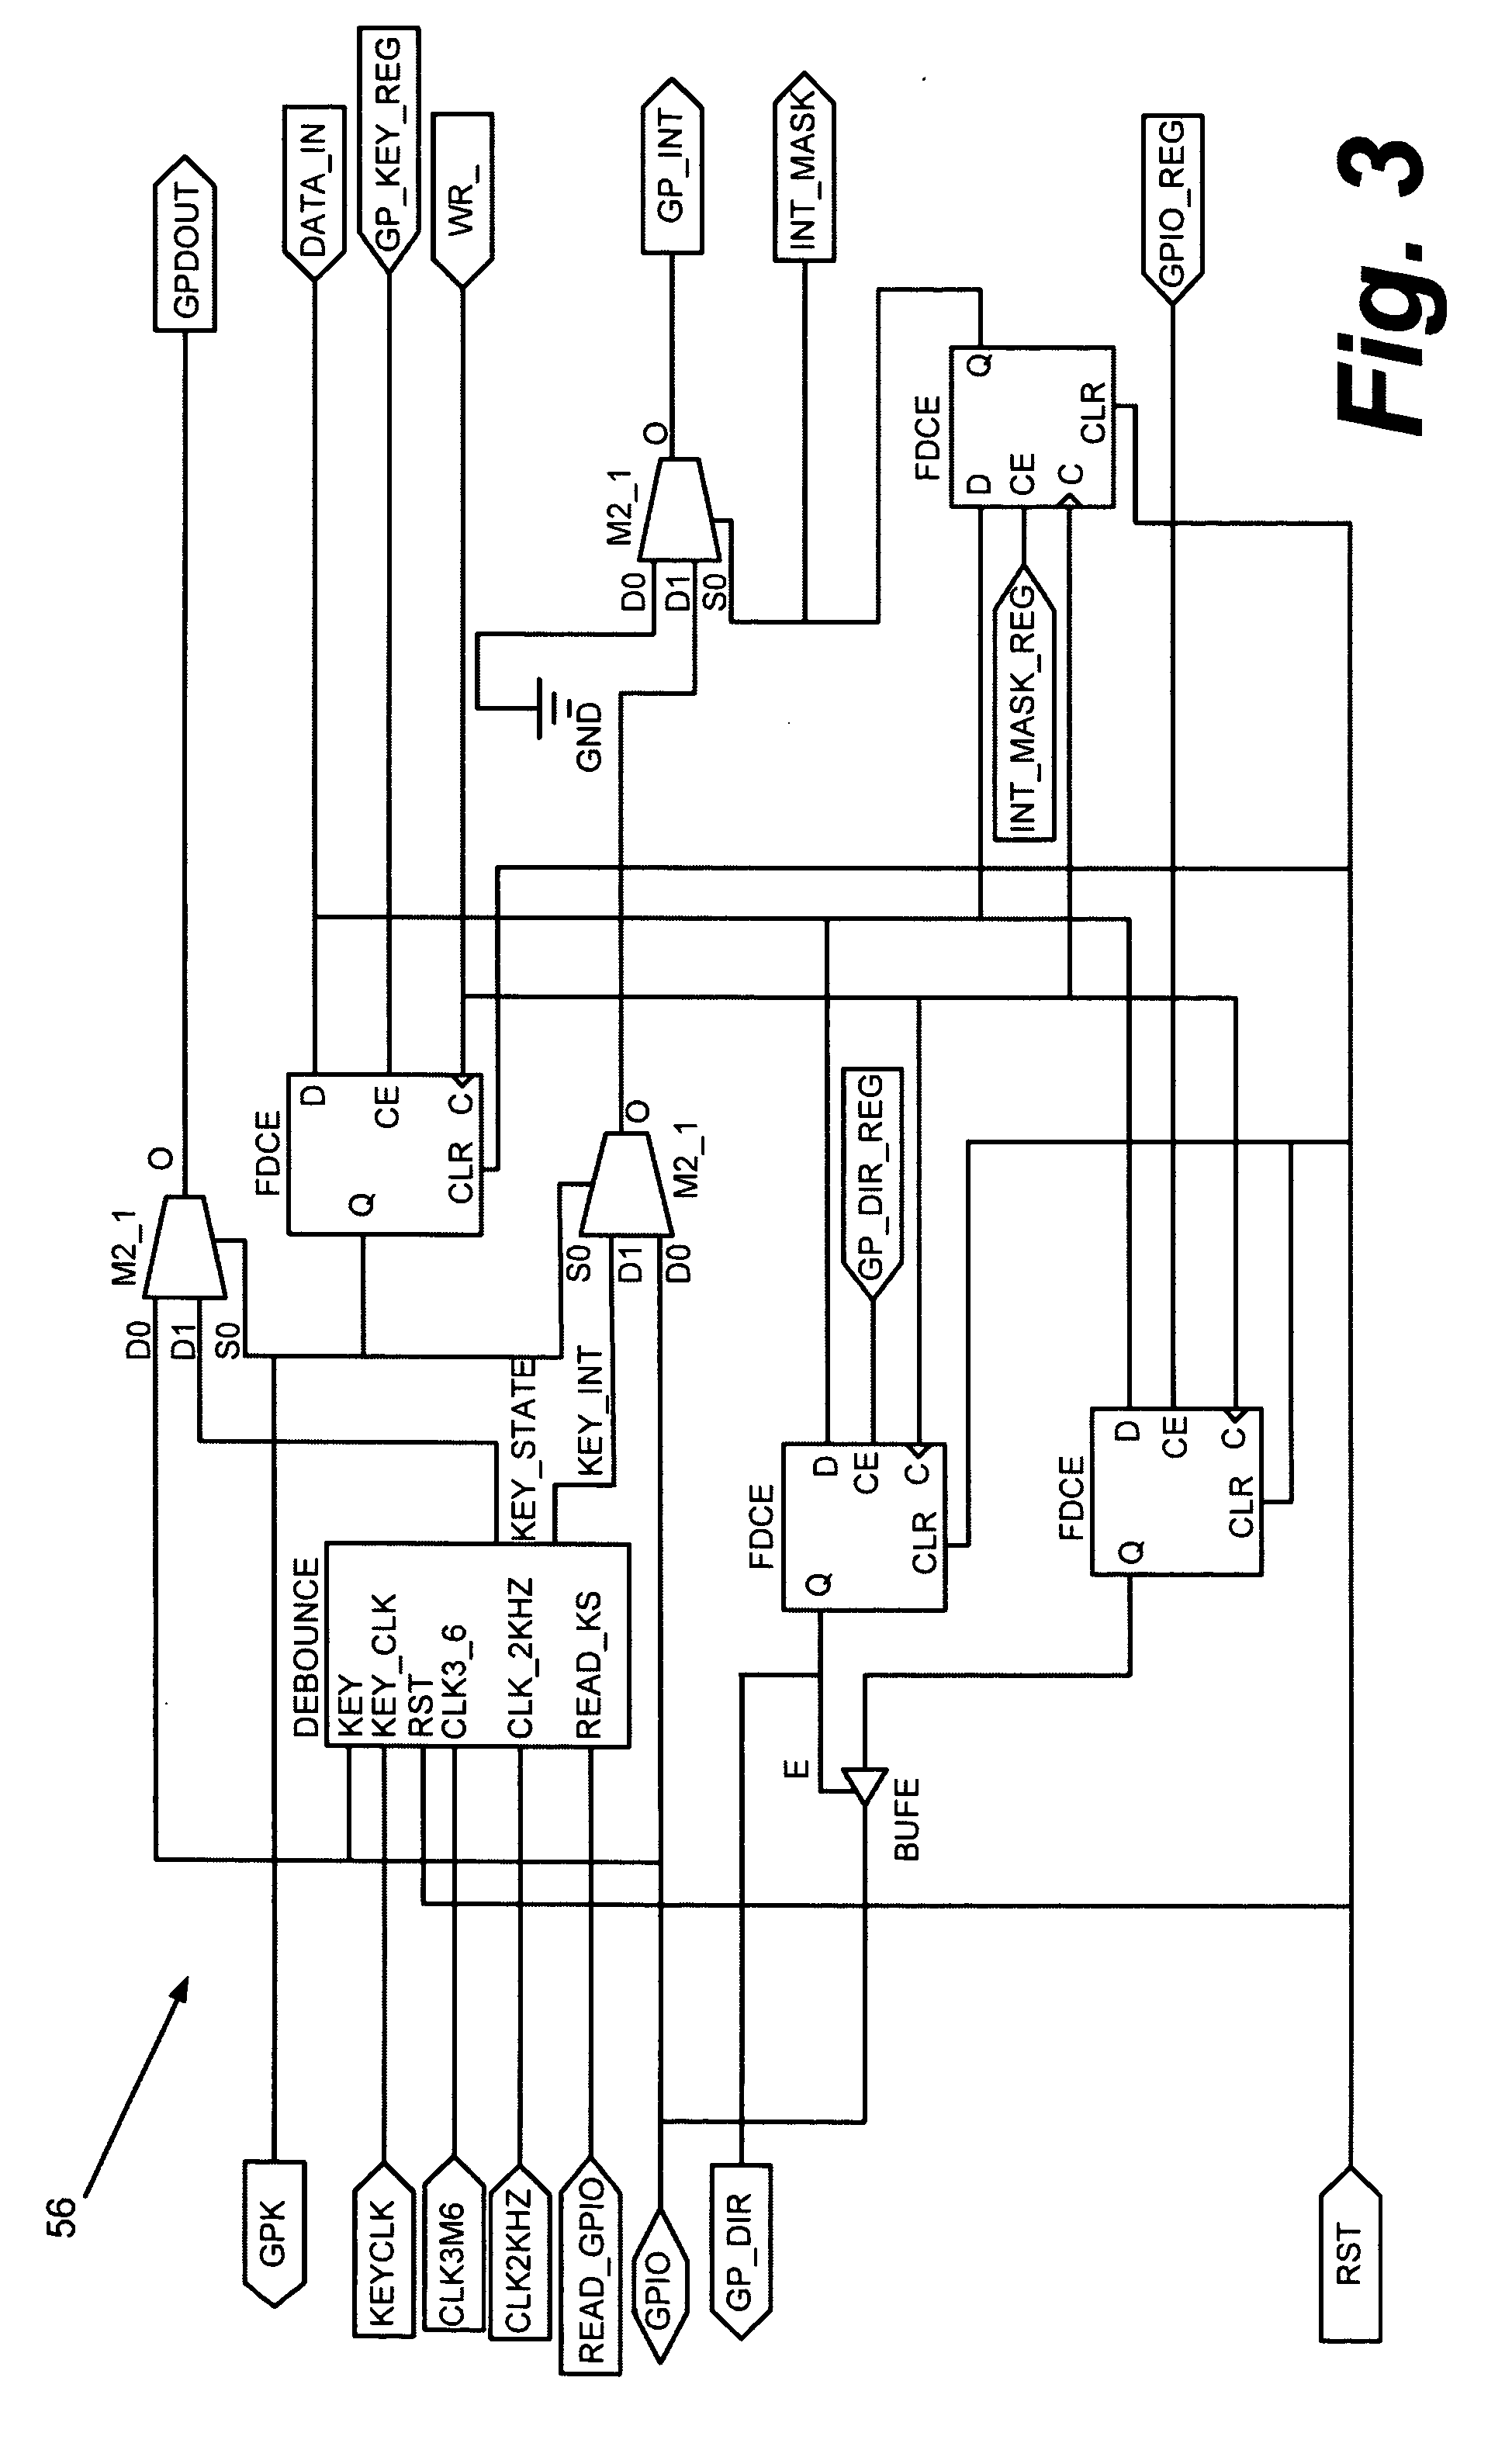 Method and apparatus for keyboard control with programmable debounce and jog